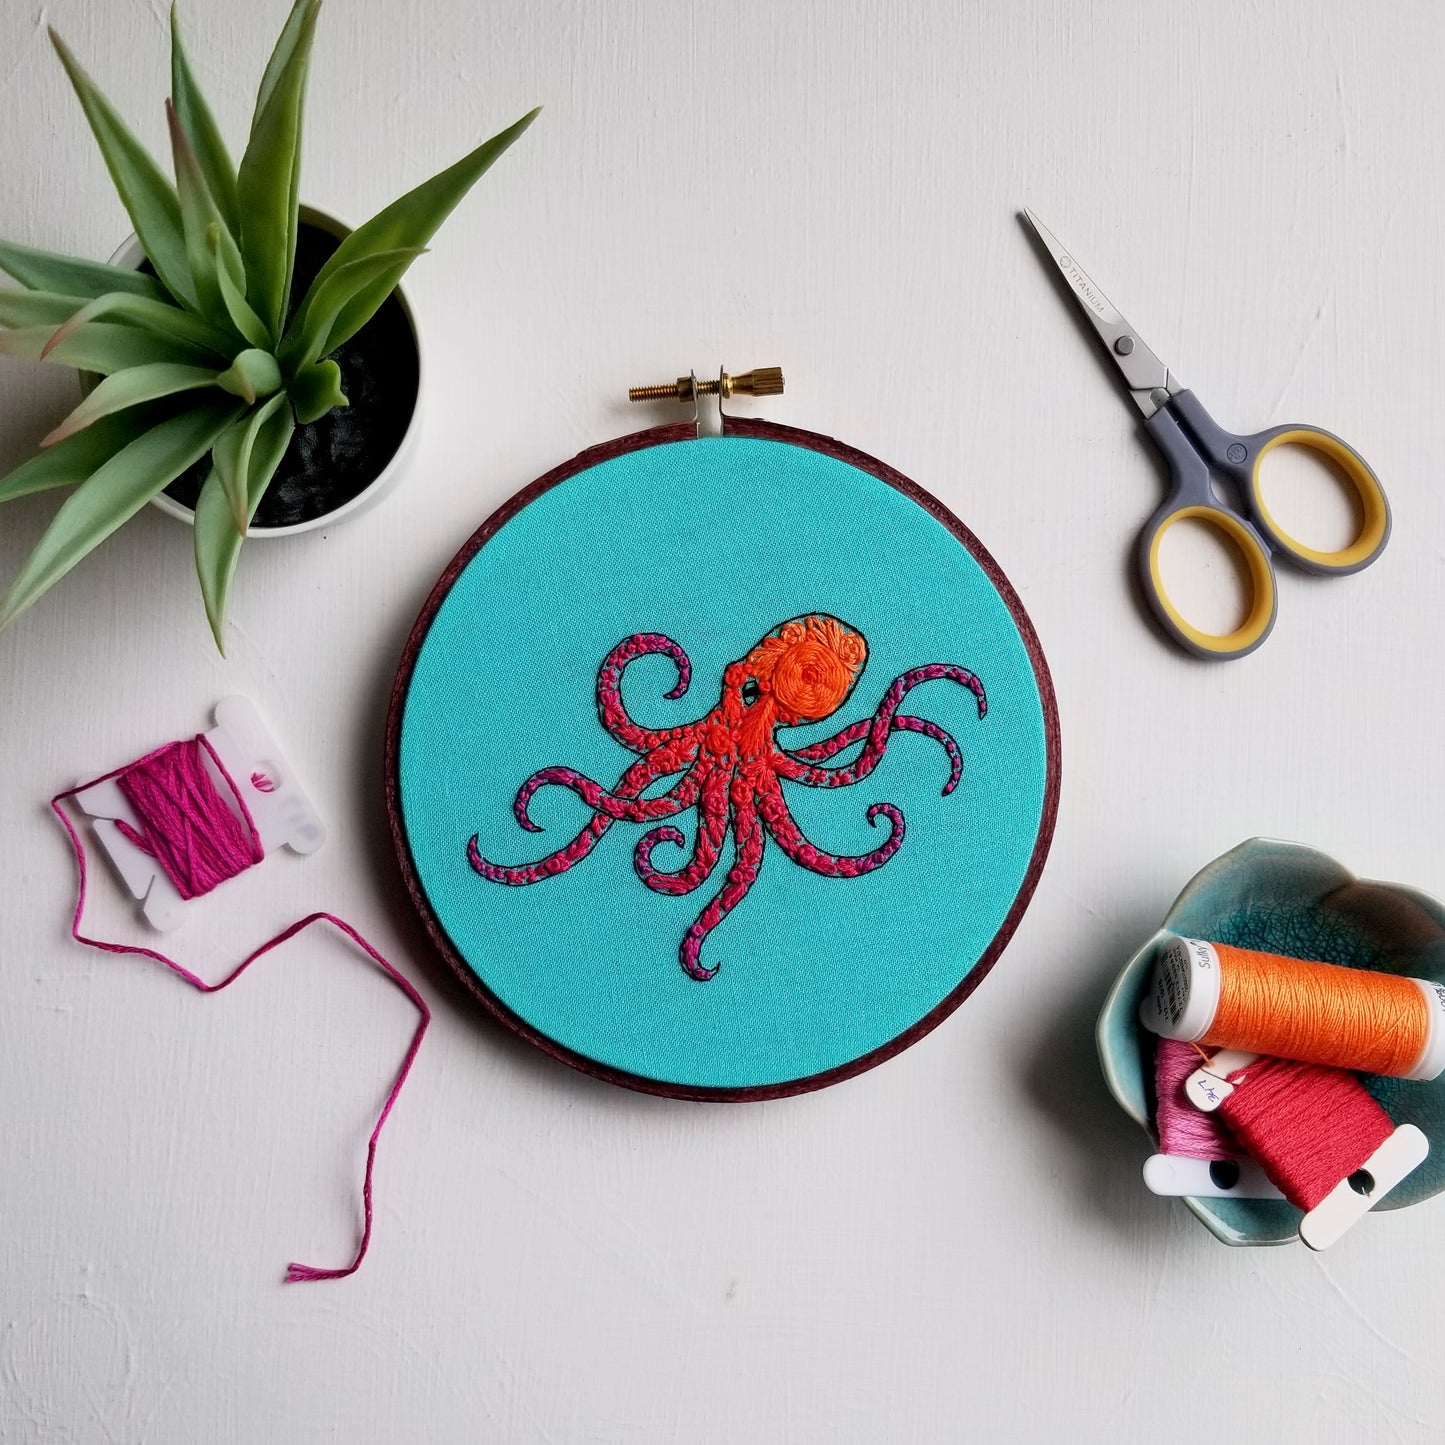 Pacific Octopus Embroidery Pattern (PDF)